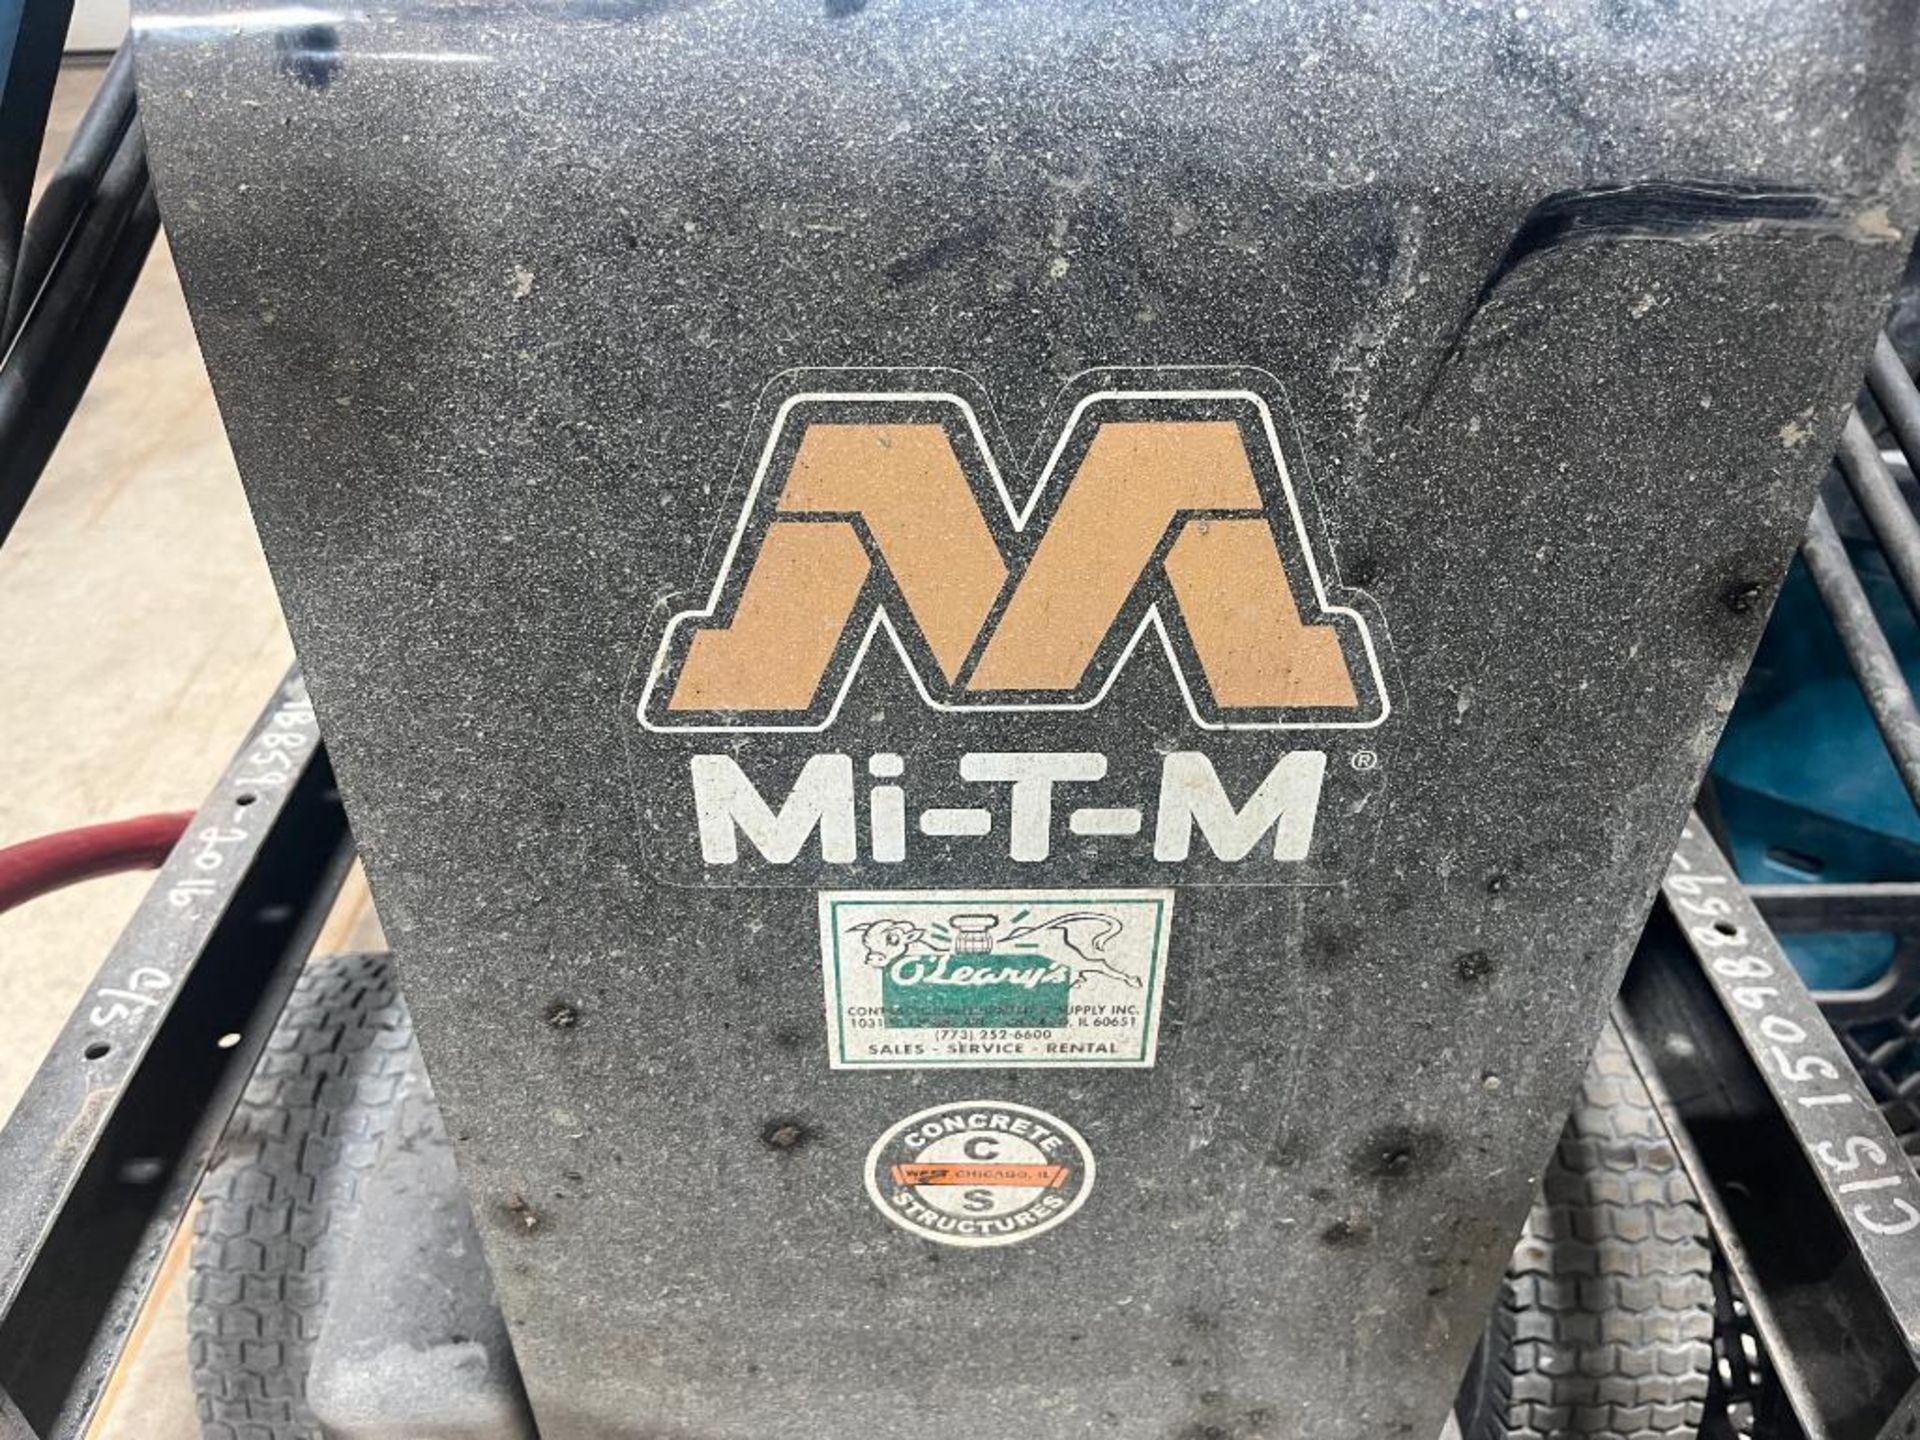 Mi-T-M Pressure Washer, model HSP-3504-3MGH, Serial#15098859 - Image 2 of 4